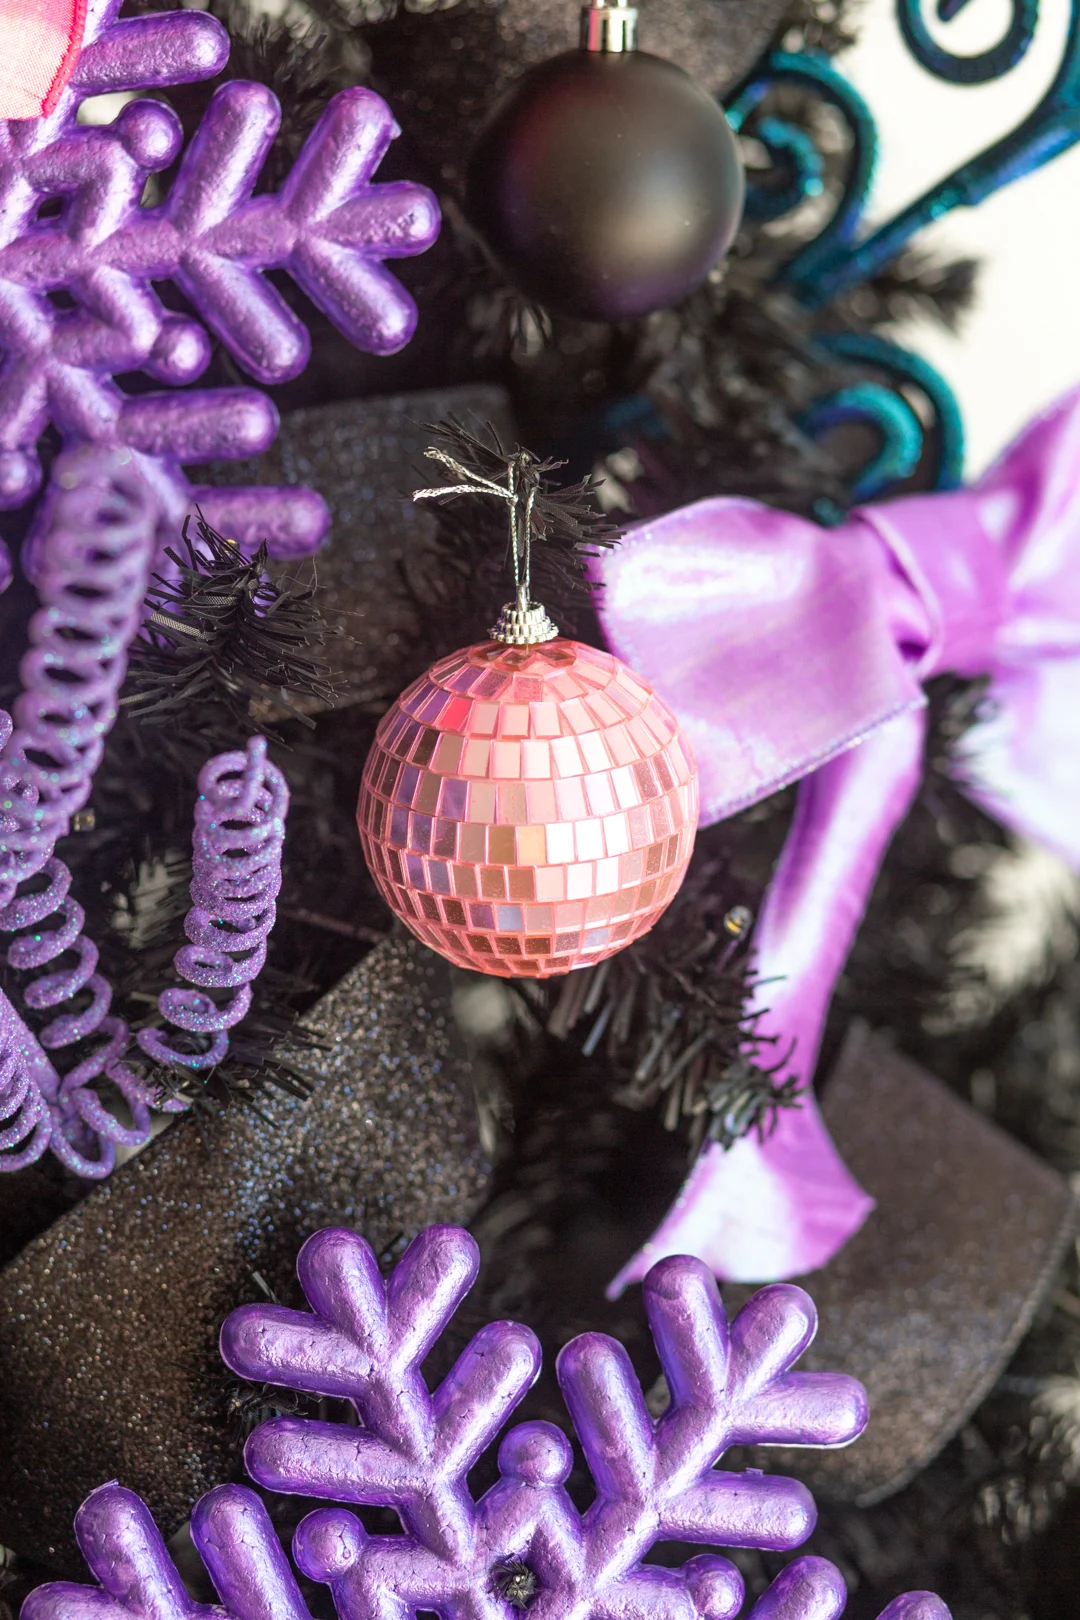 up close bubblegum pink colored disco ball styled ornament on a black christmas tree